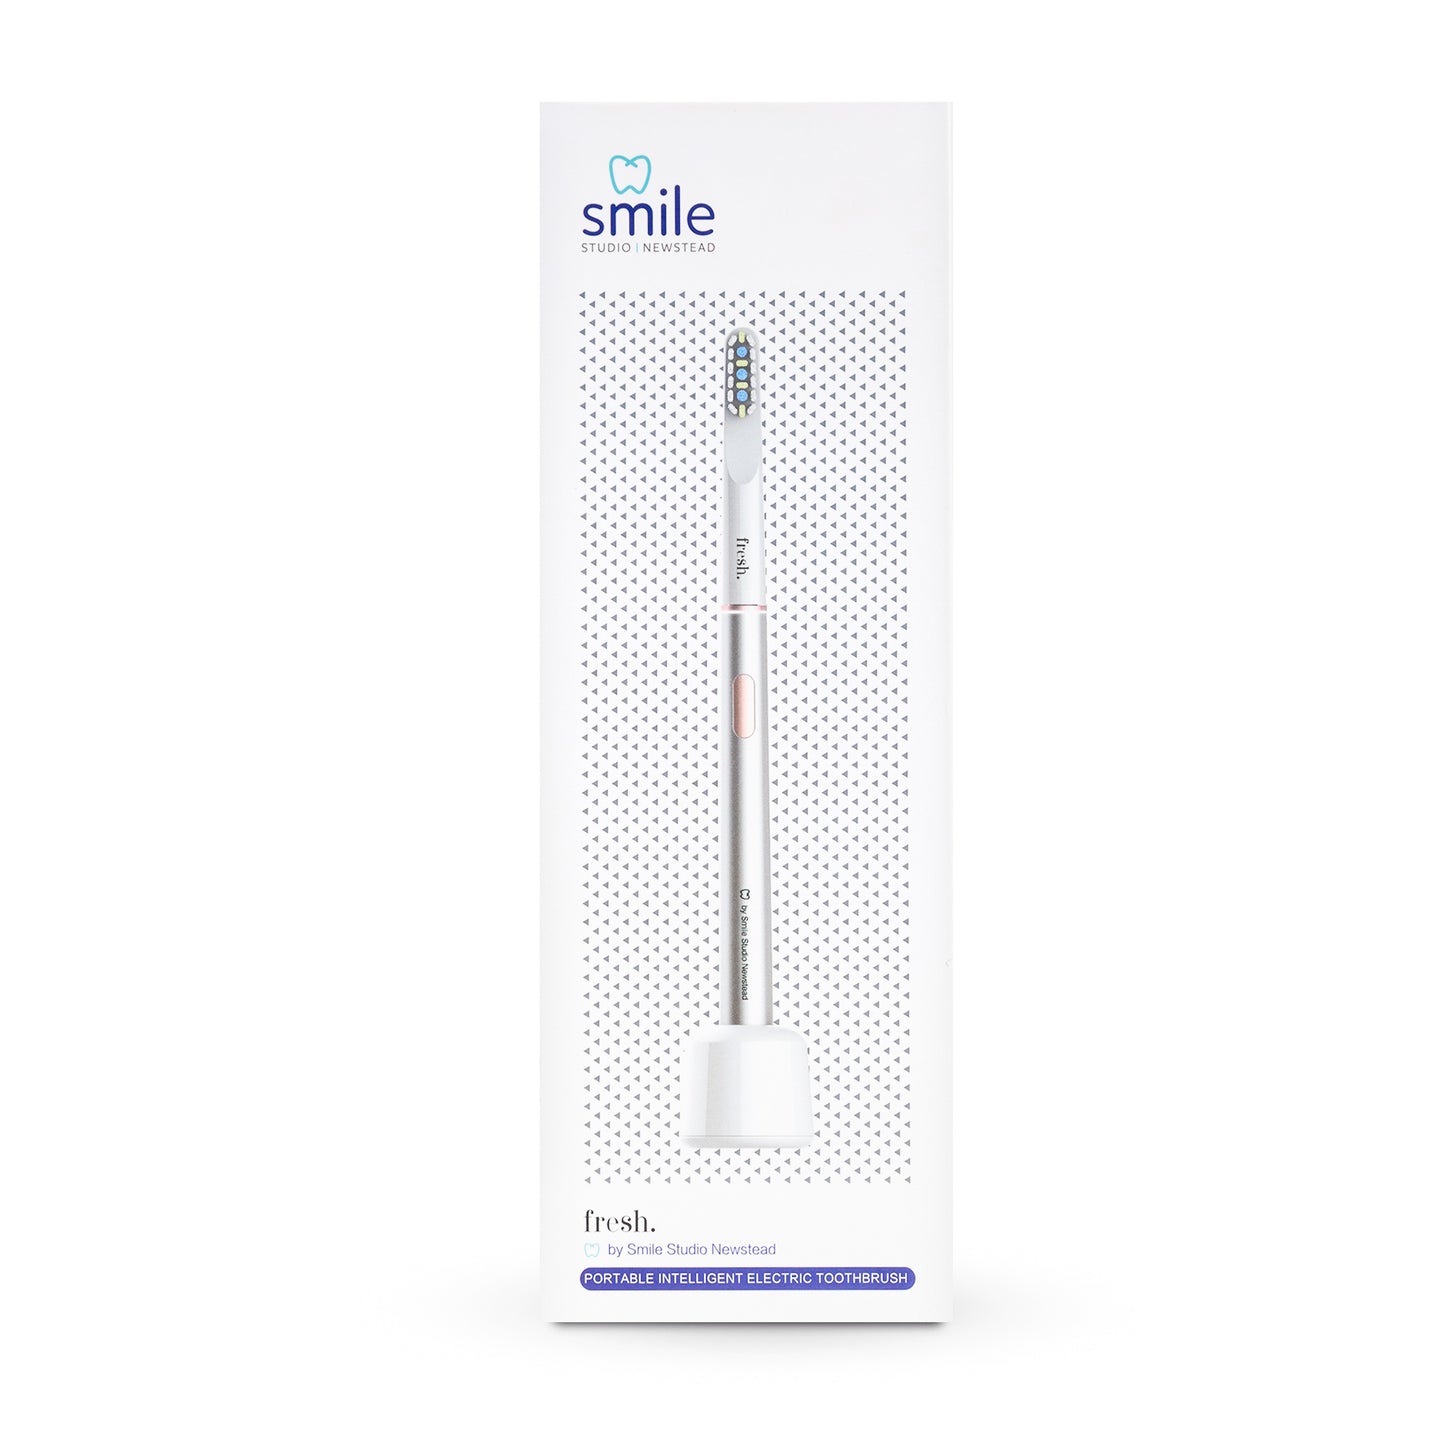 Silver Sonic Toothbrush